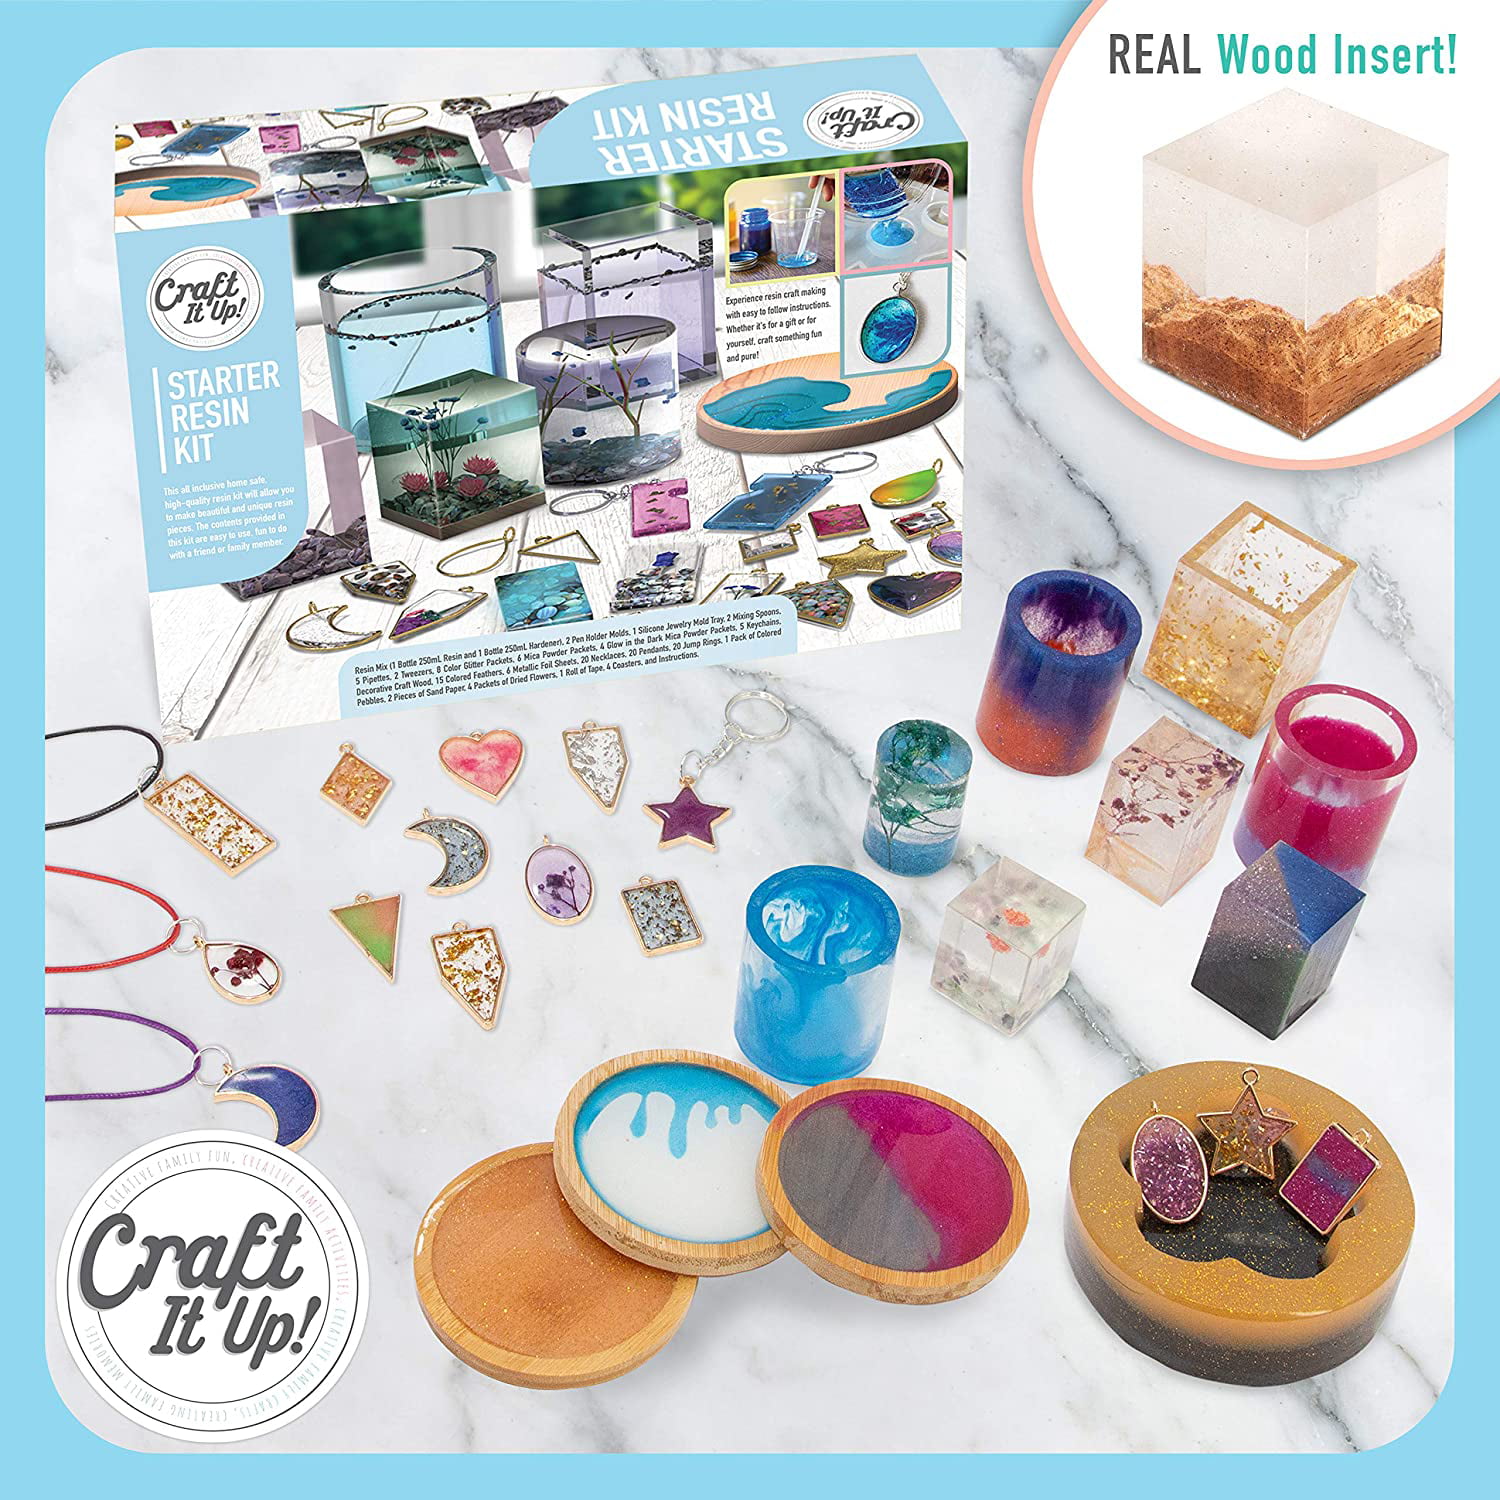 Resin Kit by Craft It Up! - Complete Starter Jewelry Making Resin Kit for  Beginners - All Inclusive Craft Resin Starter Kit - Epoxy Resin Kit with  Molds, Charms, Dyes & Dry